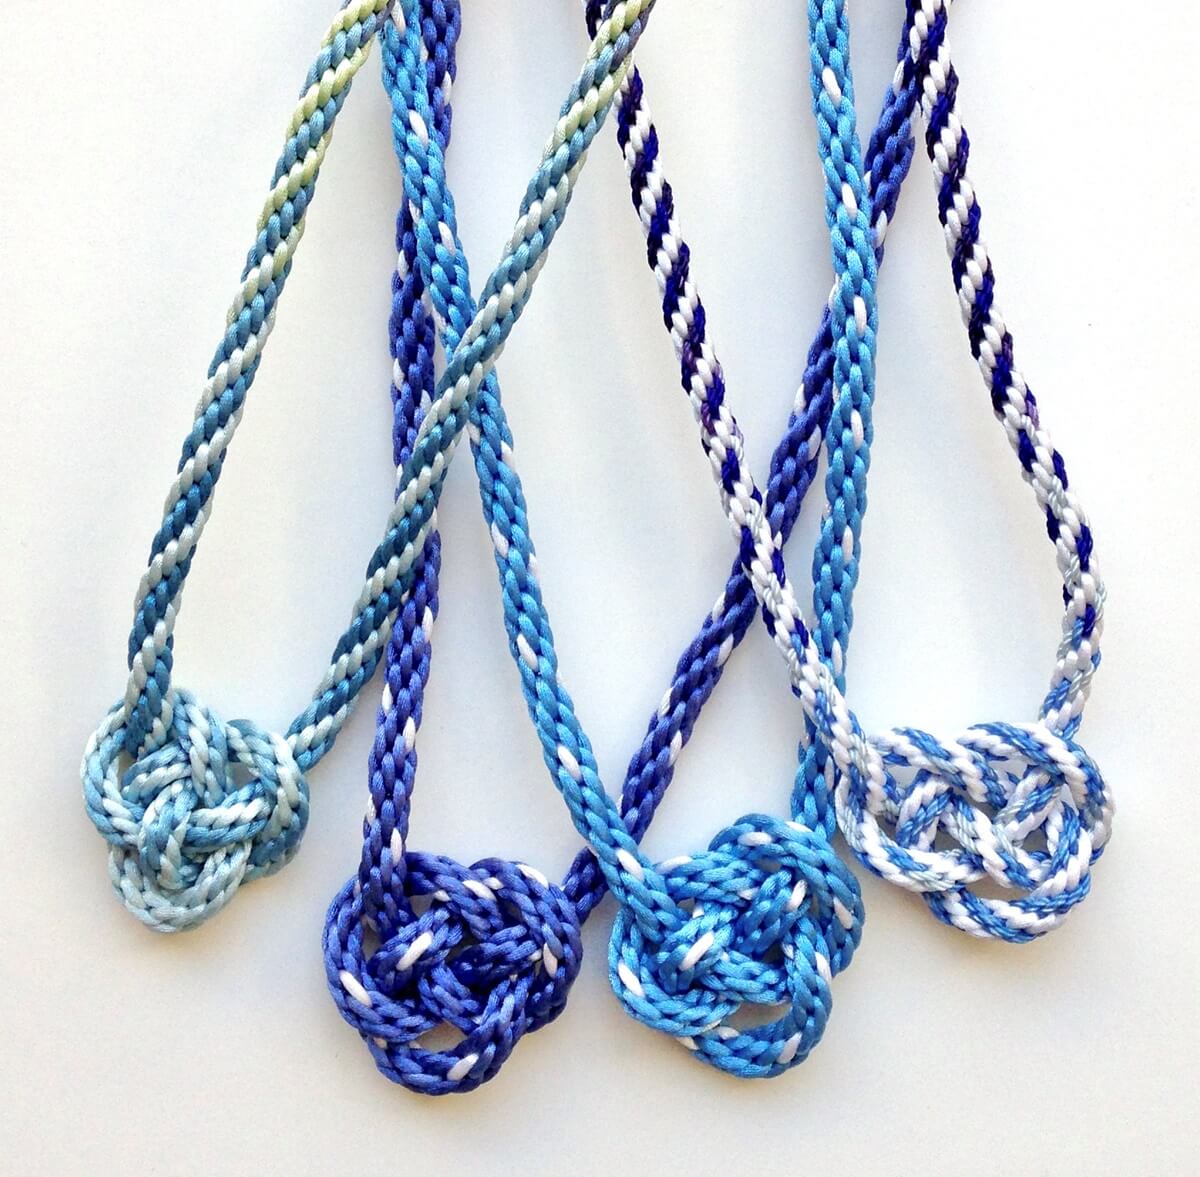 Knotted Kumihimo braided necklaces.